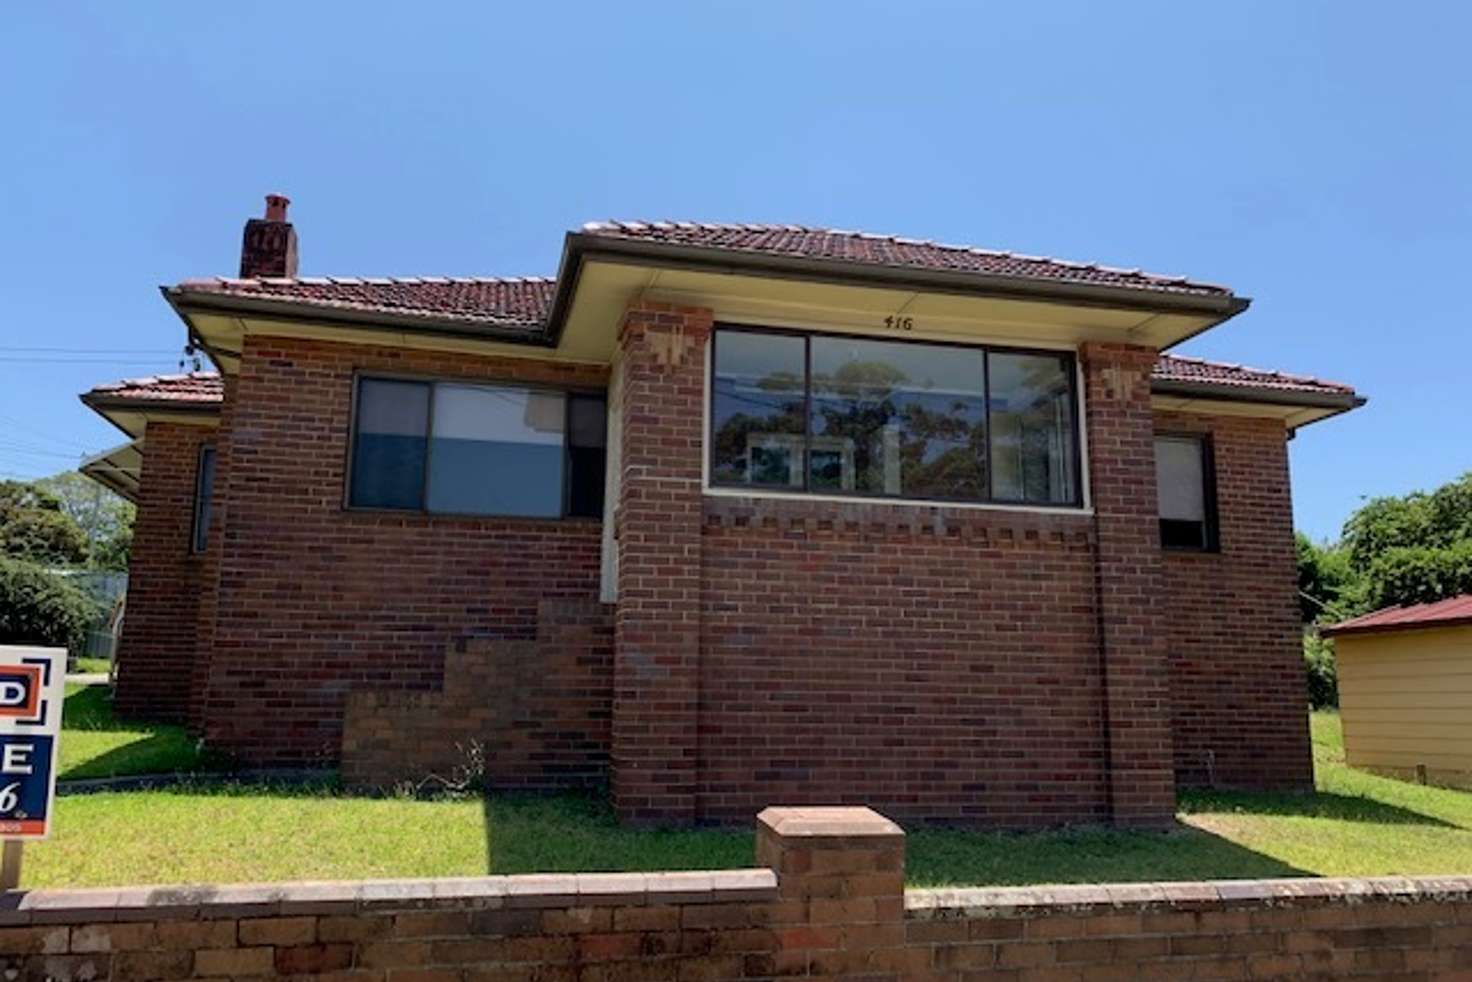 Main view of Homely house listing, 416 Newcastle Road, Lambton NSW 2299